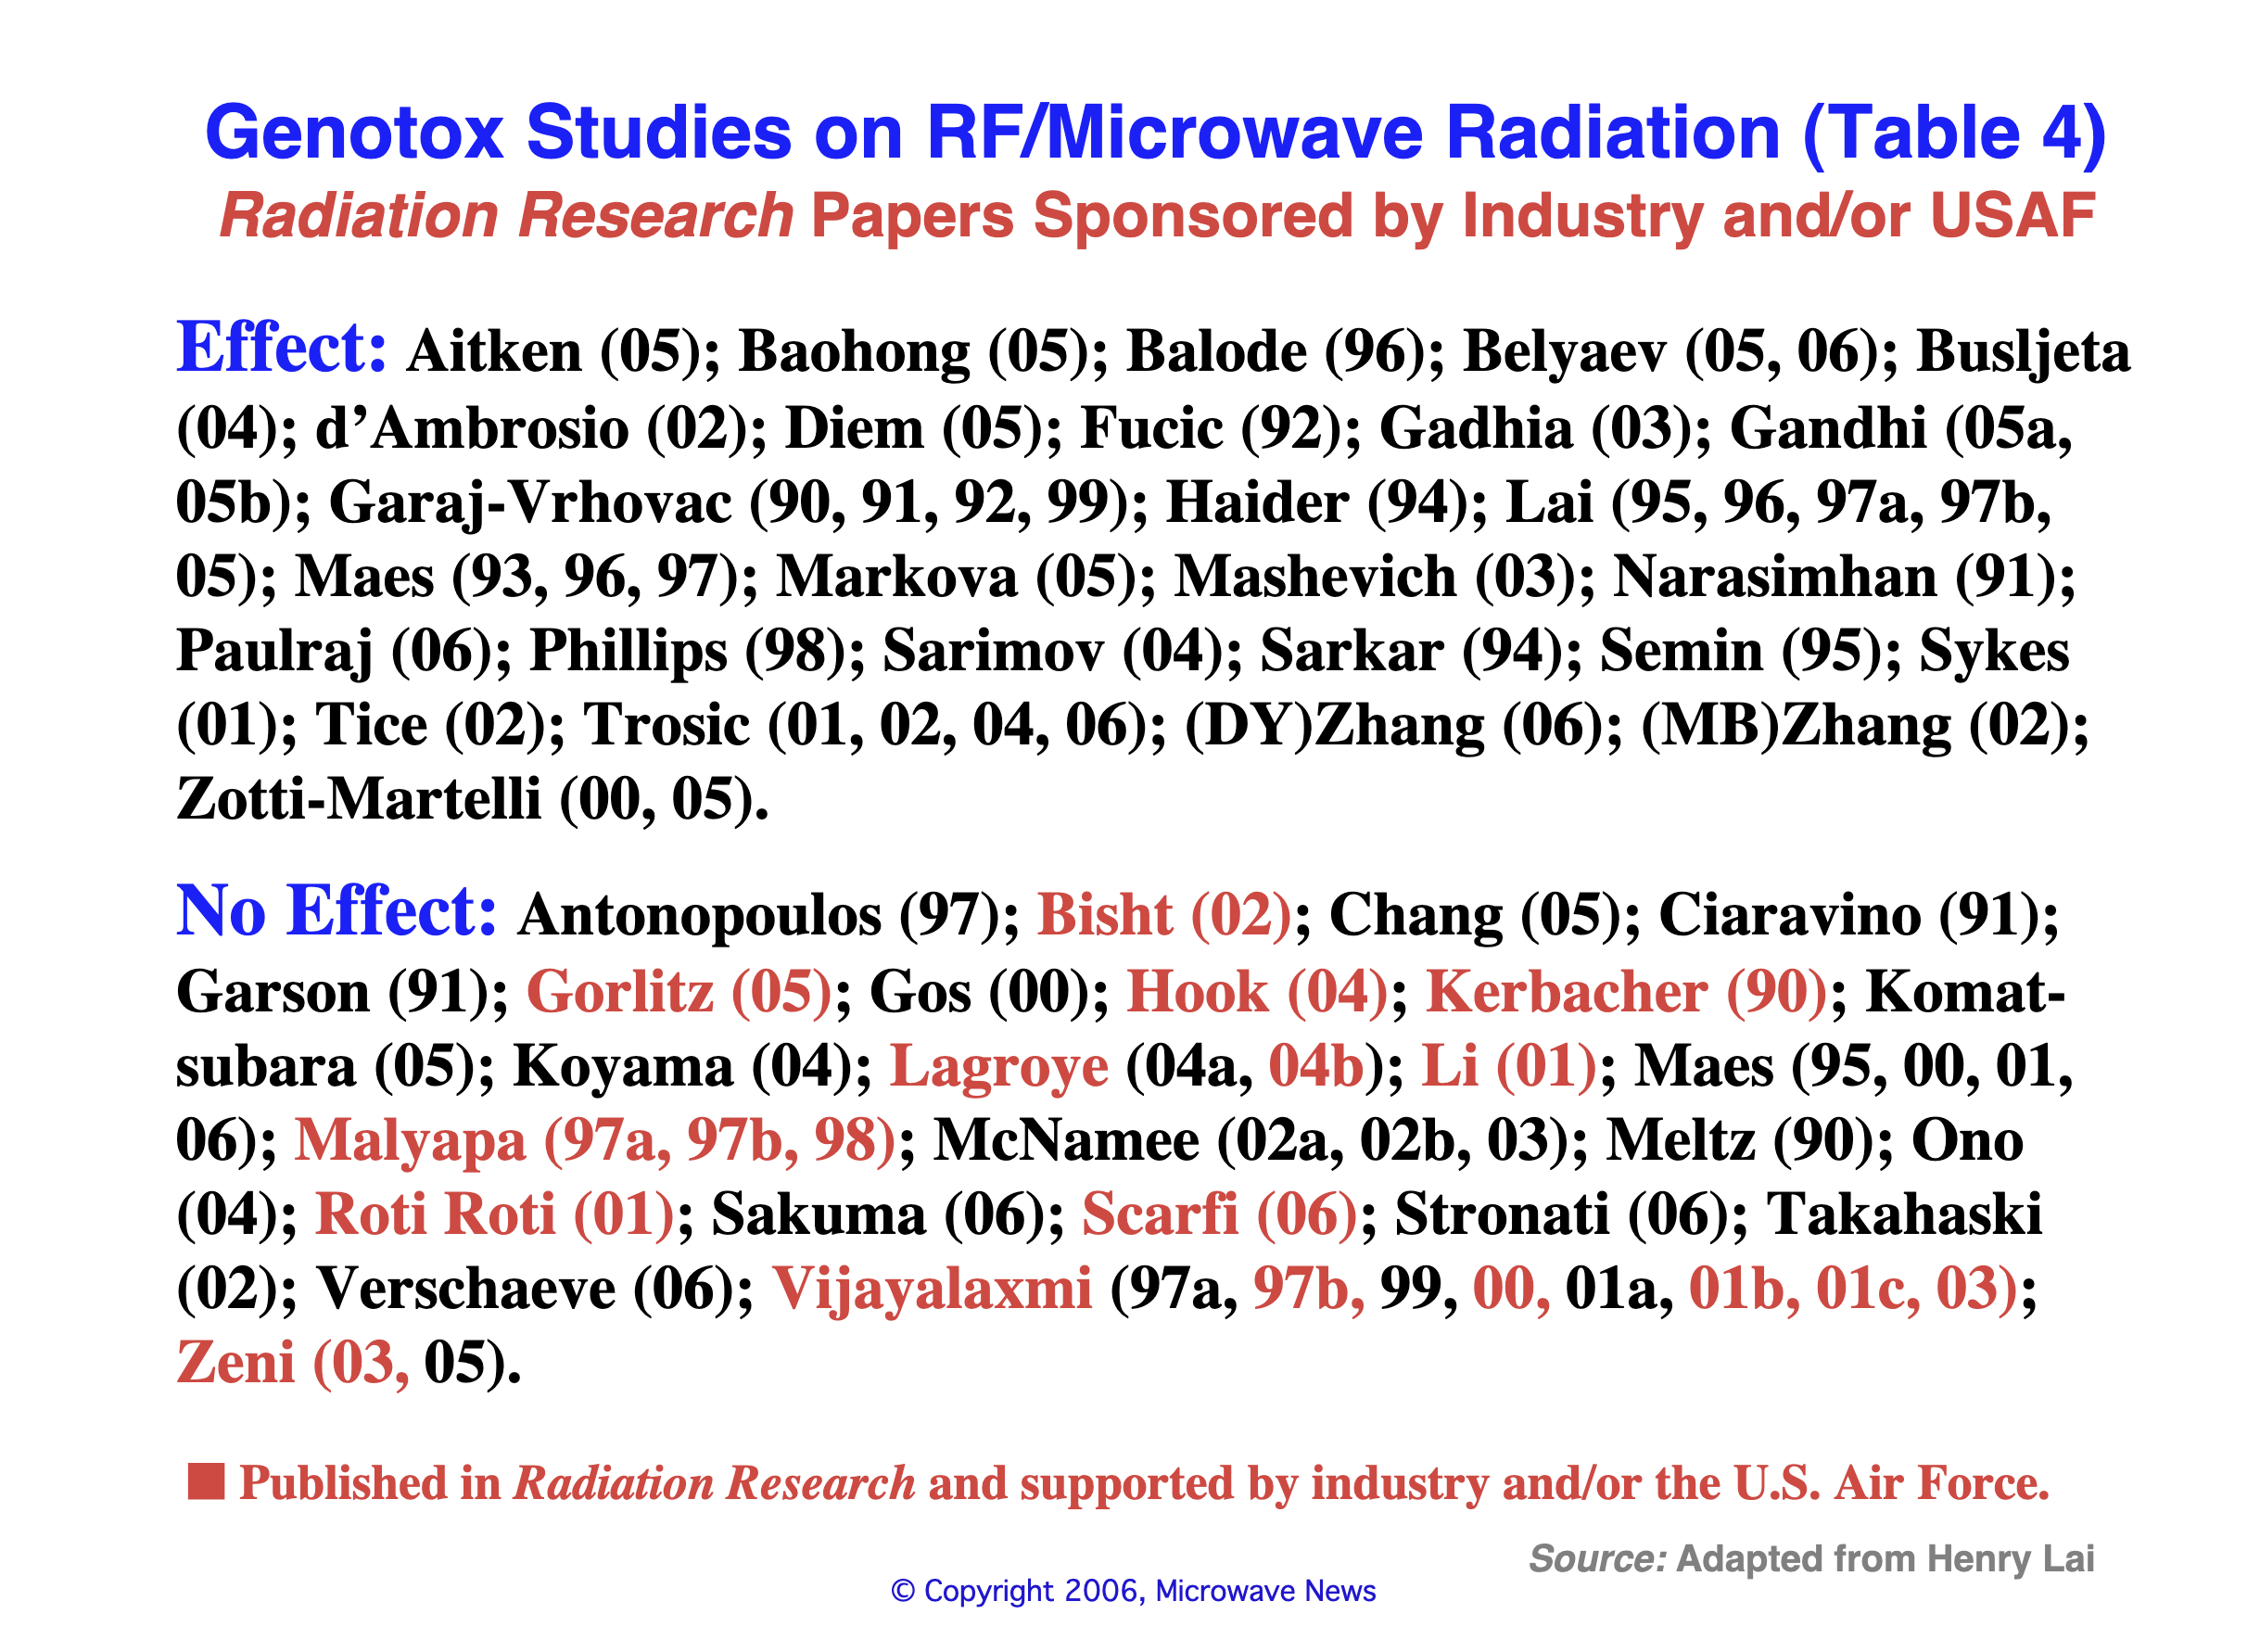 Table of Genotox Studies funded by industry and USAF